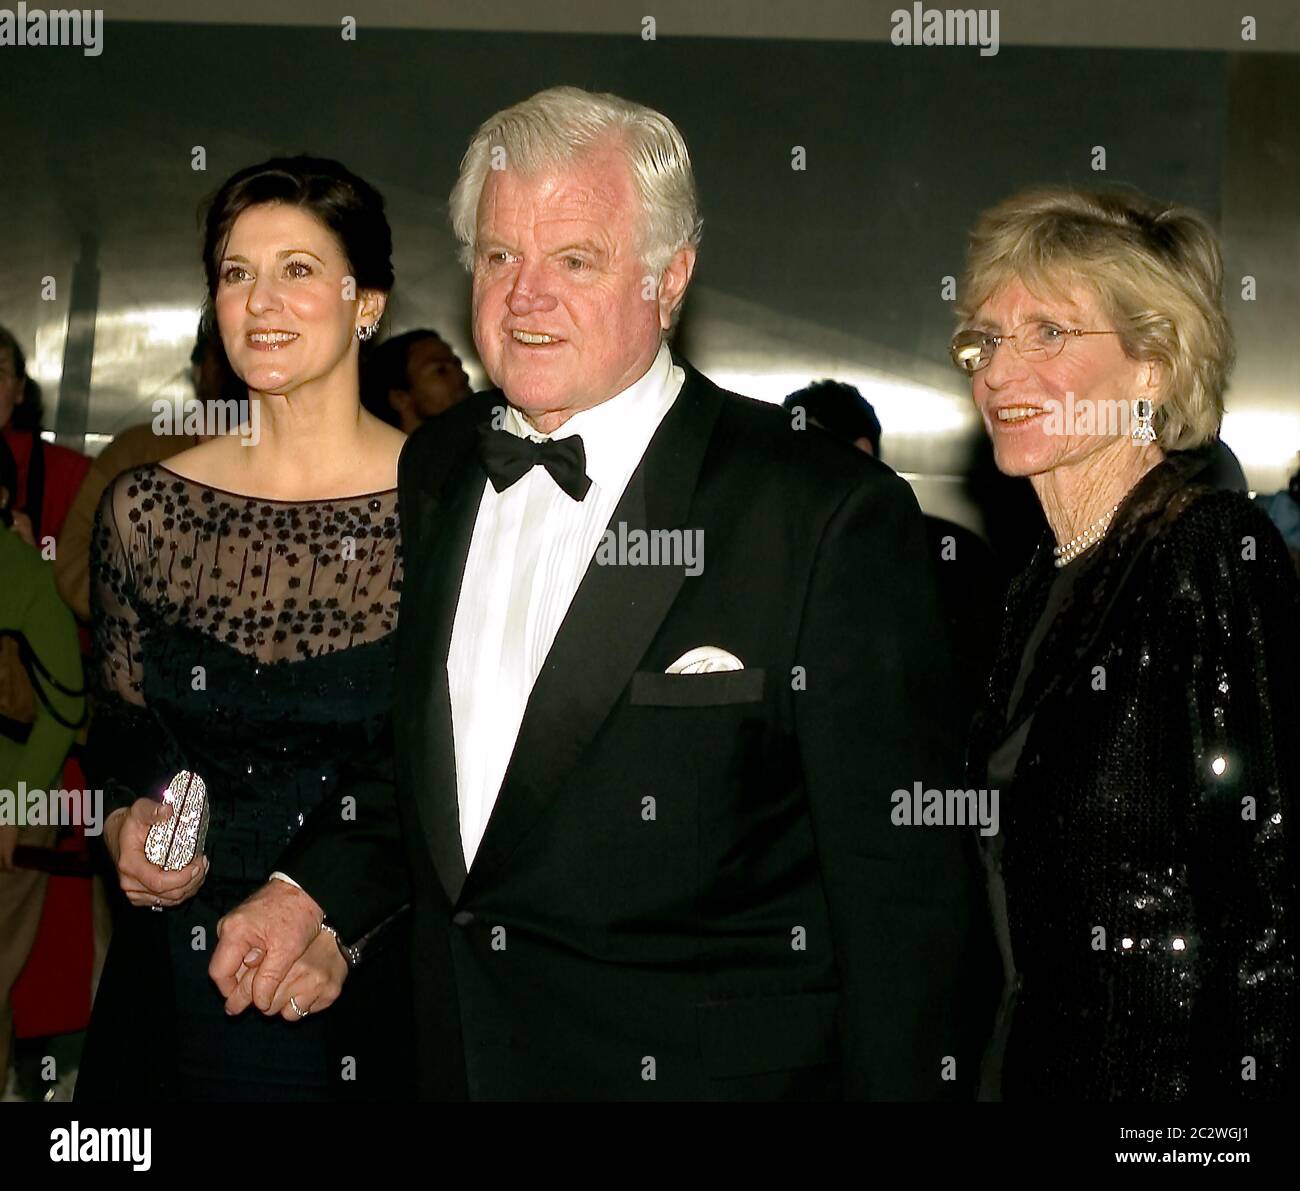 Washington, DC - December 4, 2005 -- United States Senator Ted Kennedy (Democrat of Massachusetts), center, arrives for the Kennedy Center Honors tapingwith his wife, Victoria, left, and sister, Jean Kennedy Smith, right, at the John F. Kennedy Center for the Performing Arts in Washington, DC on December 4, 2005.Credit: Ron Sachs/CNP | usage worldwide Stock Photo